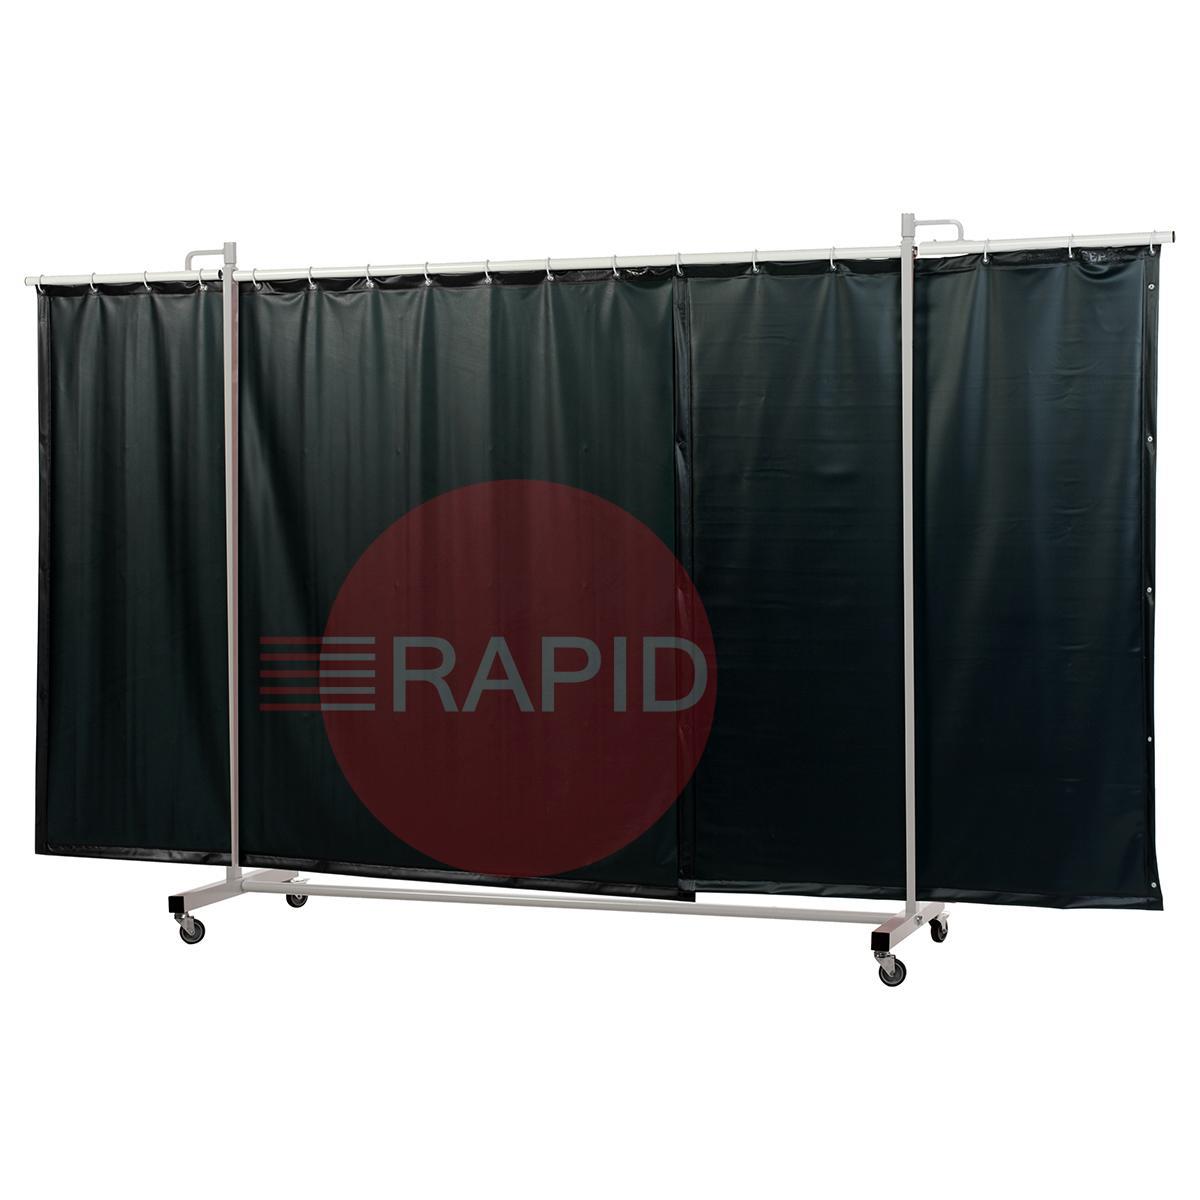 36.31.19  CEPRO Robusto Triptych Welding Screen with Green-9 Curtain - 3.6m Wide x 2.2m High, Approved EN 25980